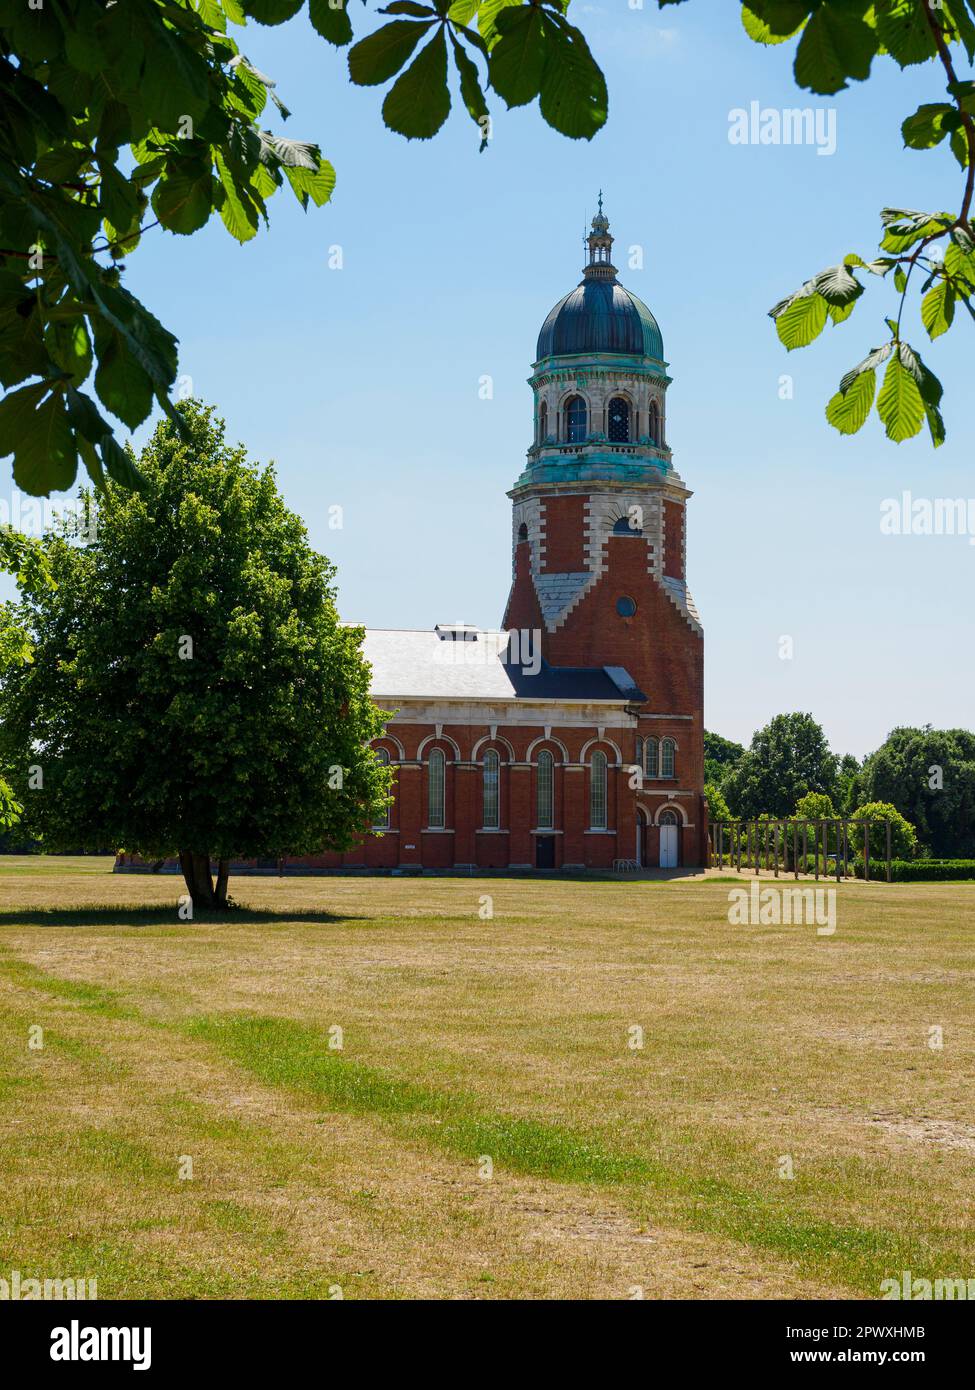 The Chapel at the Royal Victoria Country Park, Netley, Hampshire, UK Stock Photo